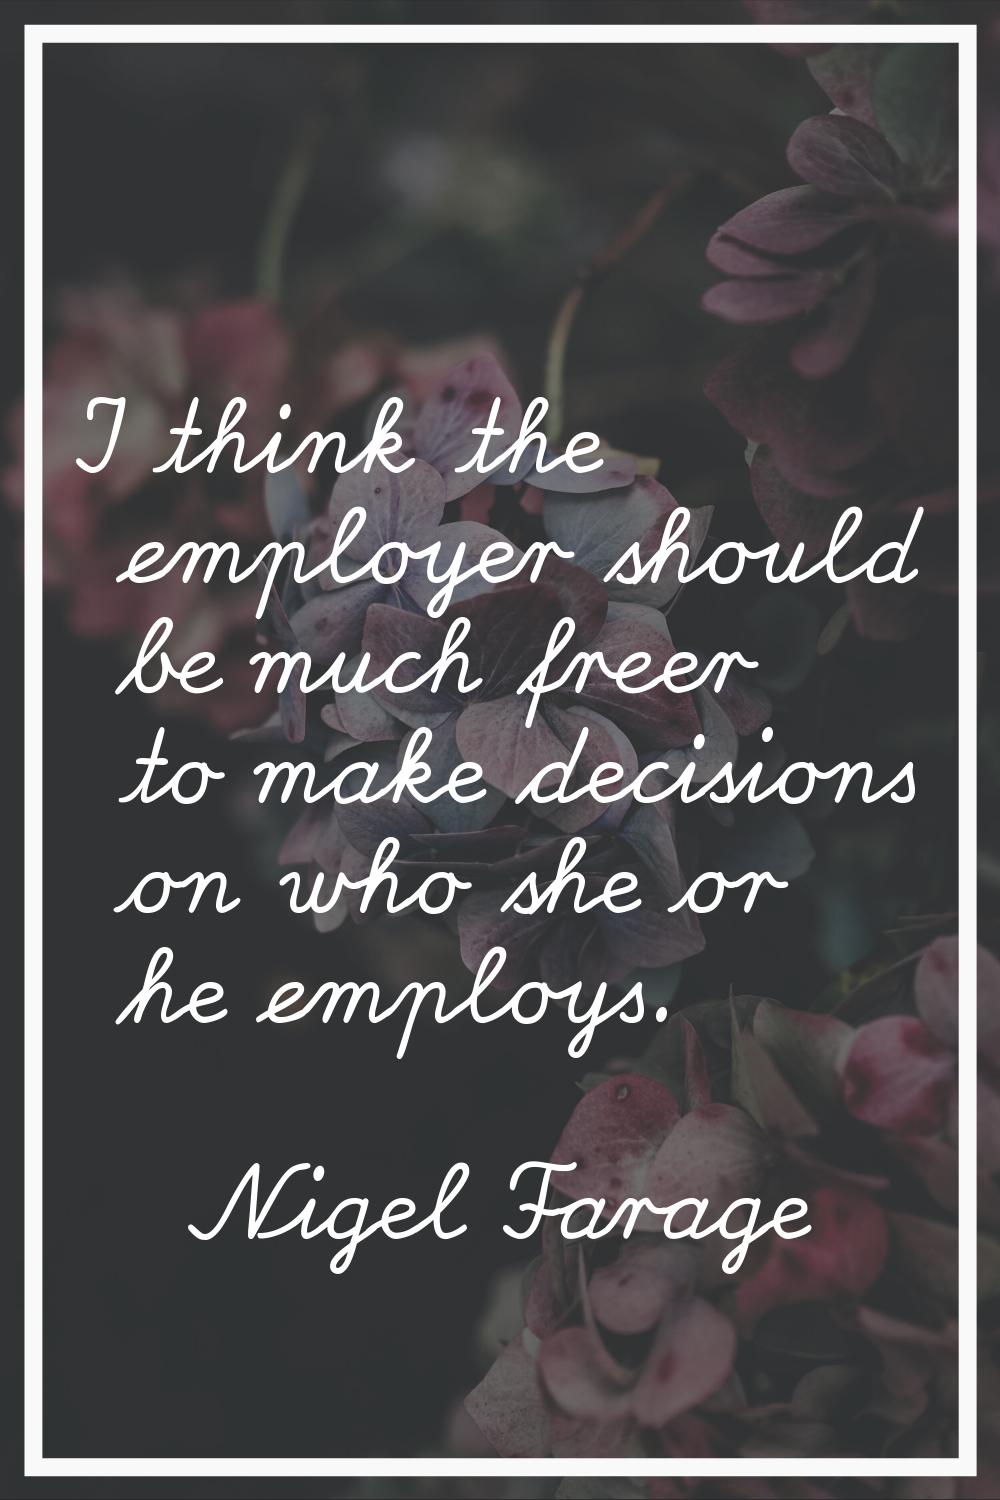 I think the employer should be much freer to make decisions on who she or he employs.